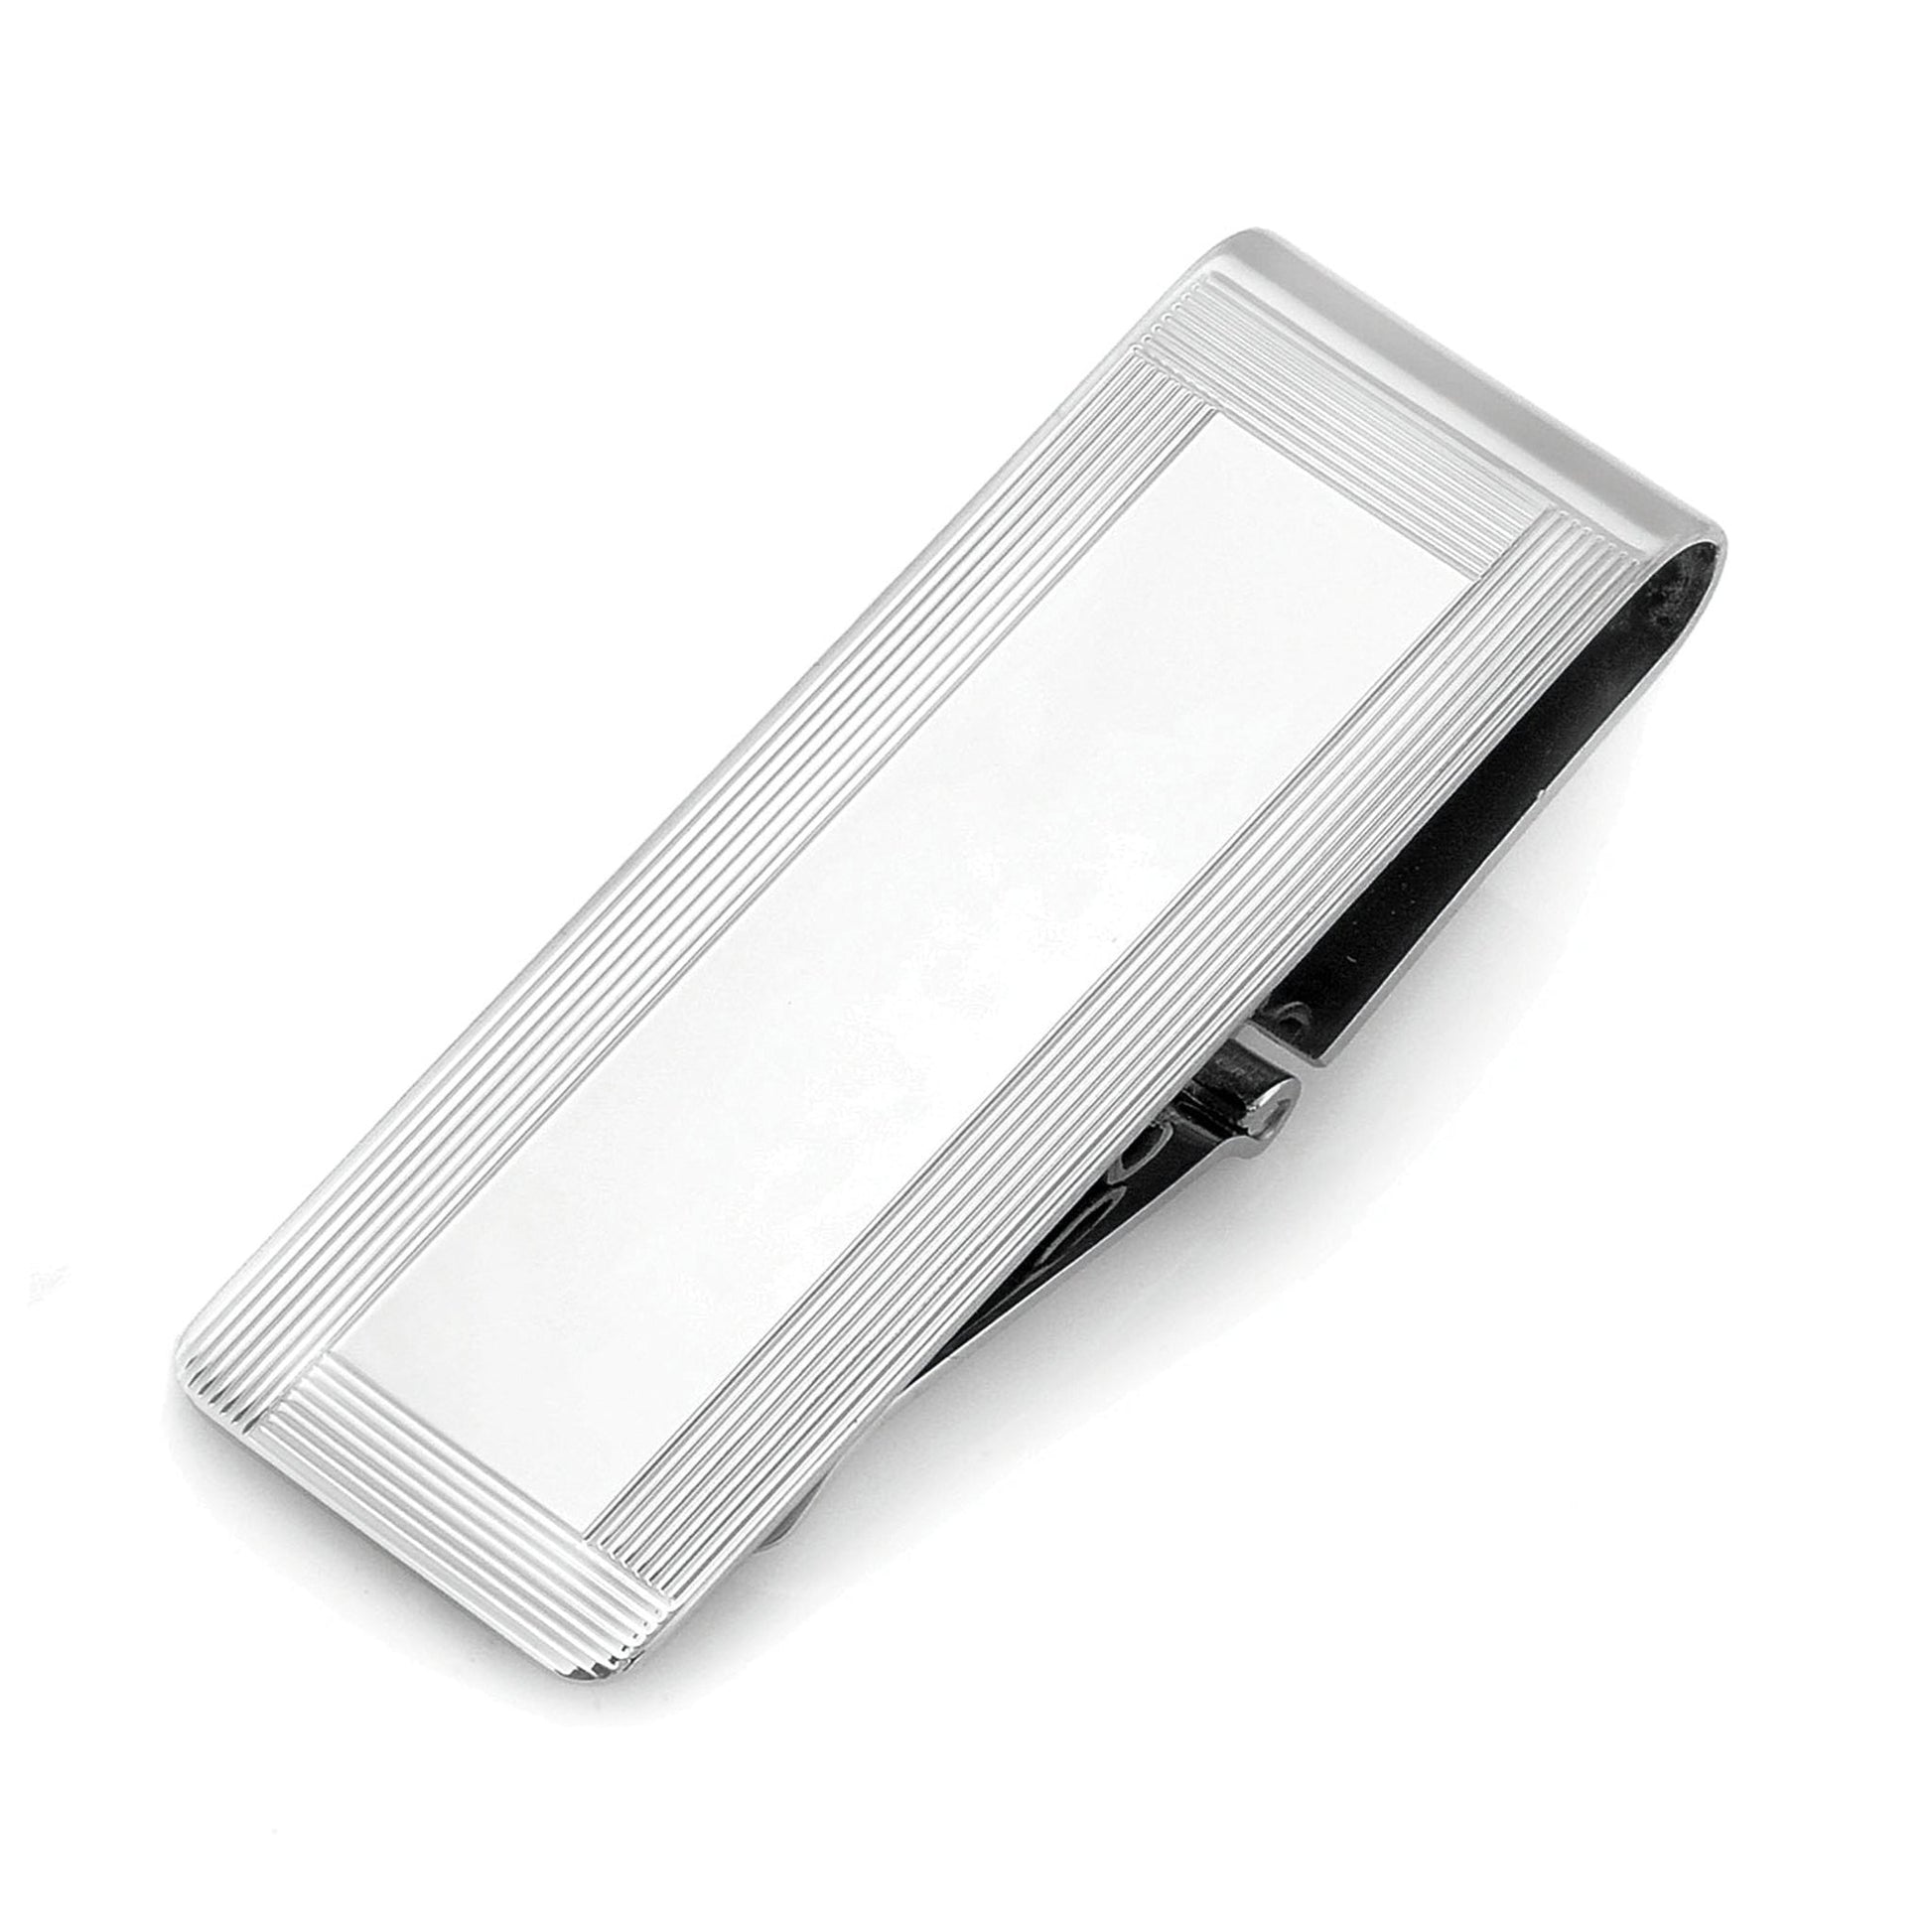 A hinged engine-turned sterling silver money clip displayed on a neutral white background.